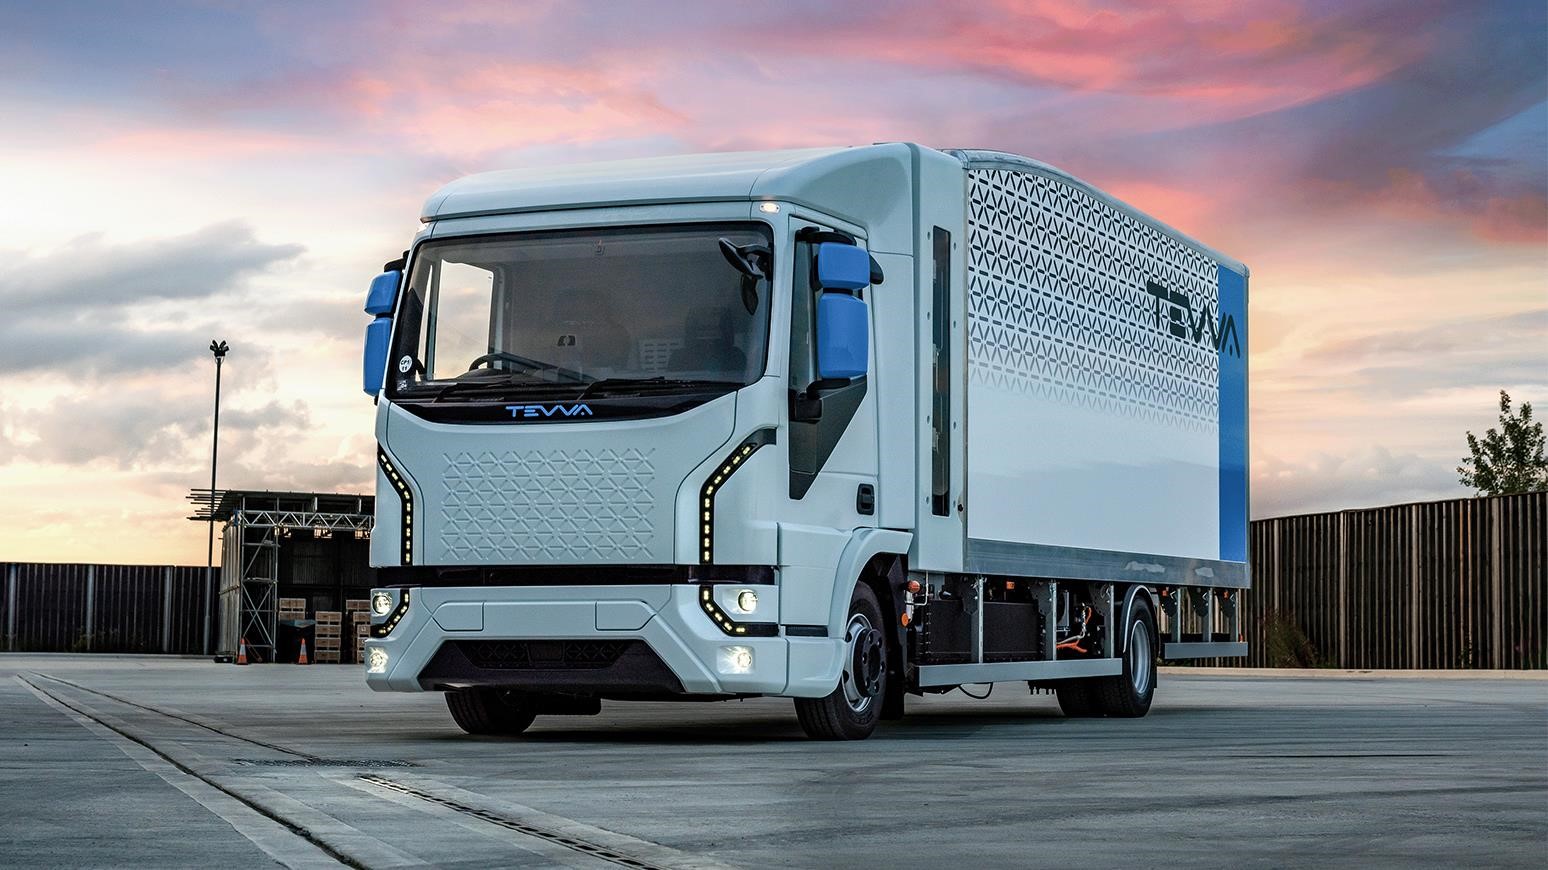 Tevva Secures Eligibility For UK Plug-in Vehicle Grant With Its 7.5-Tonne Battery-Electric Truck